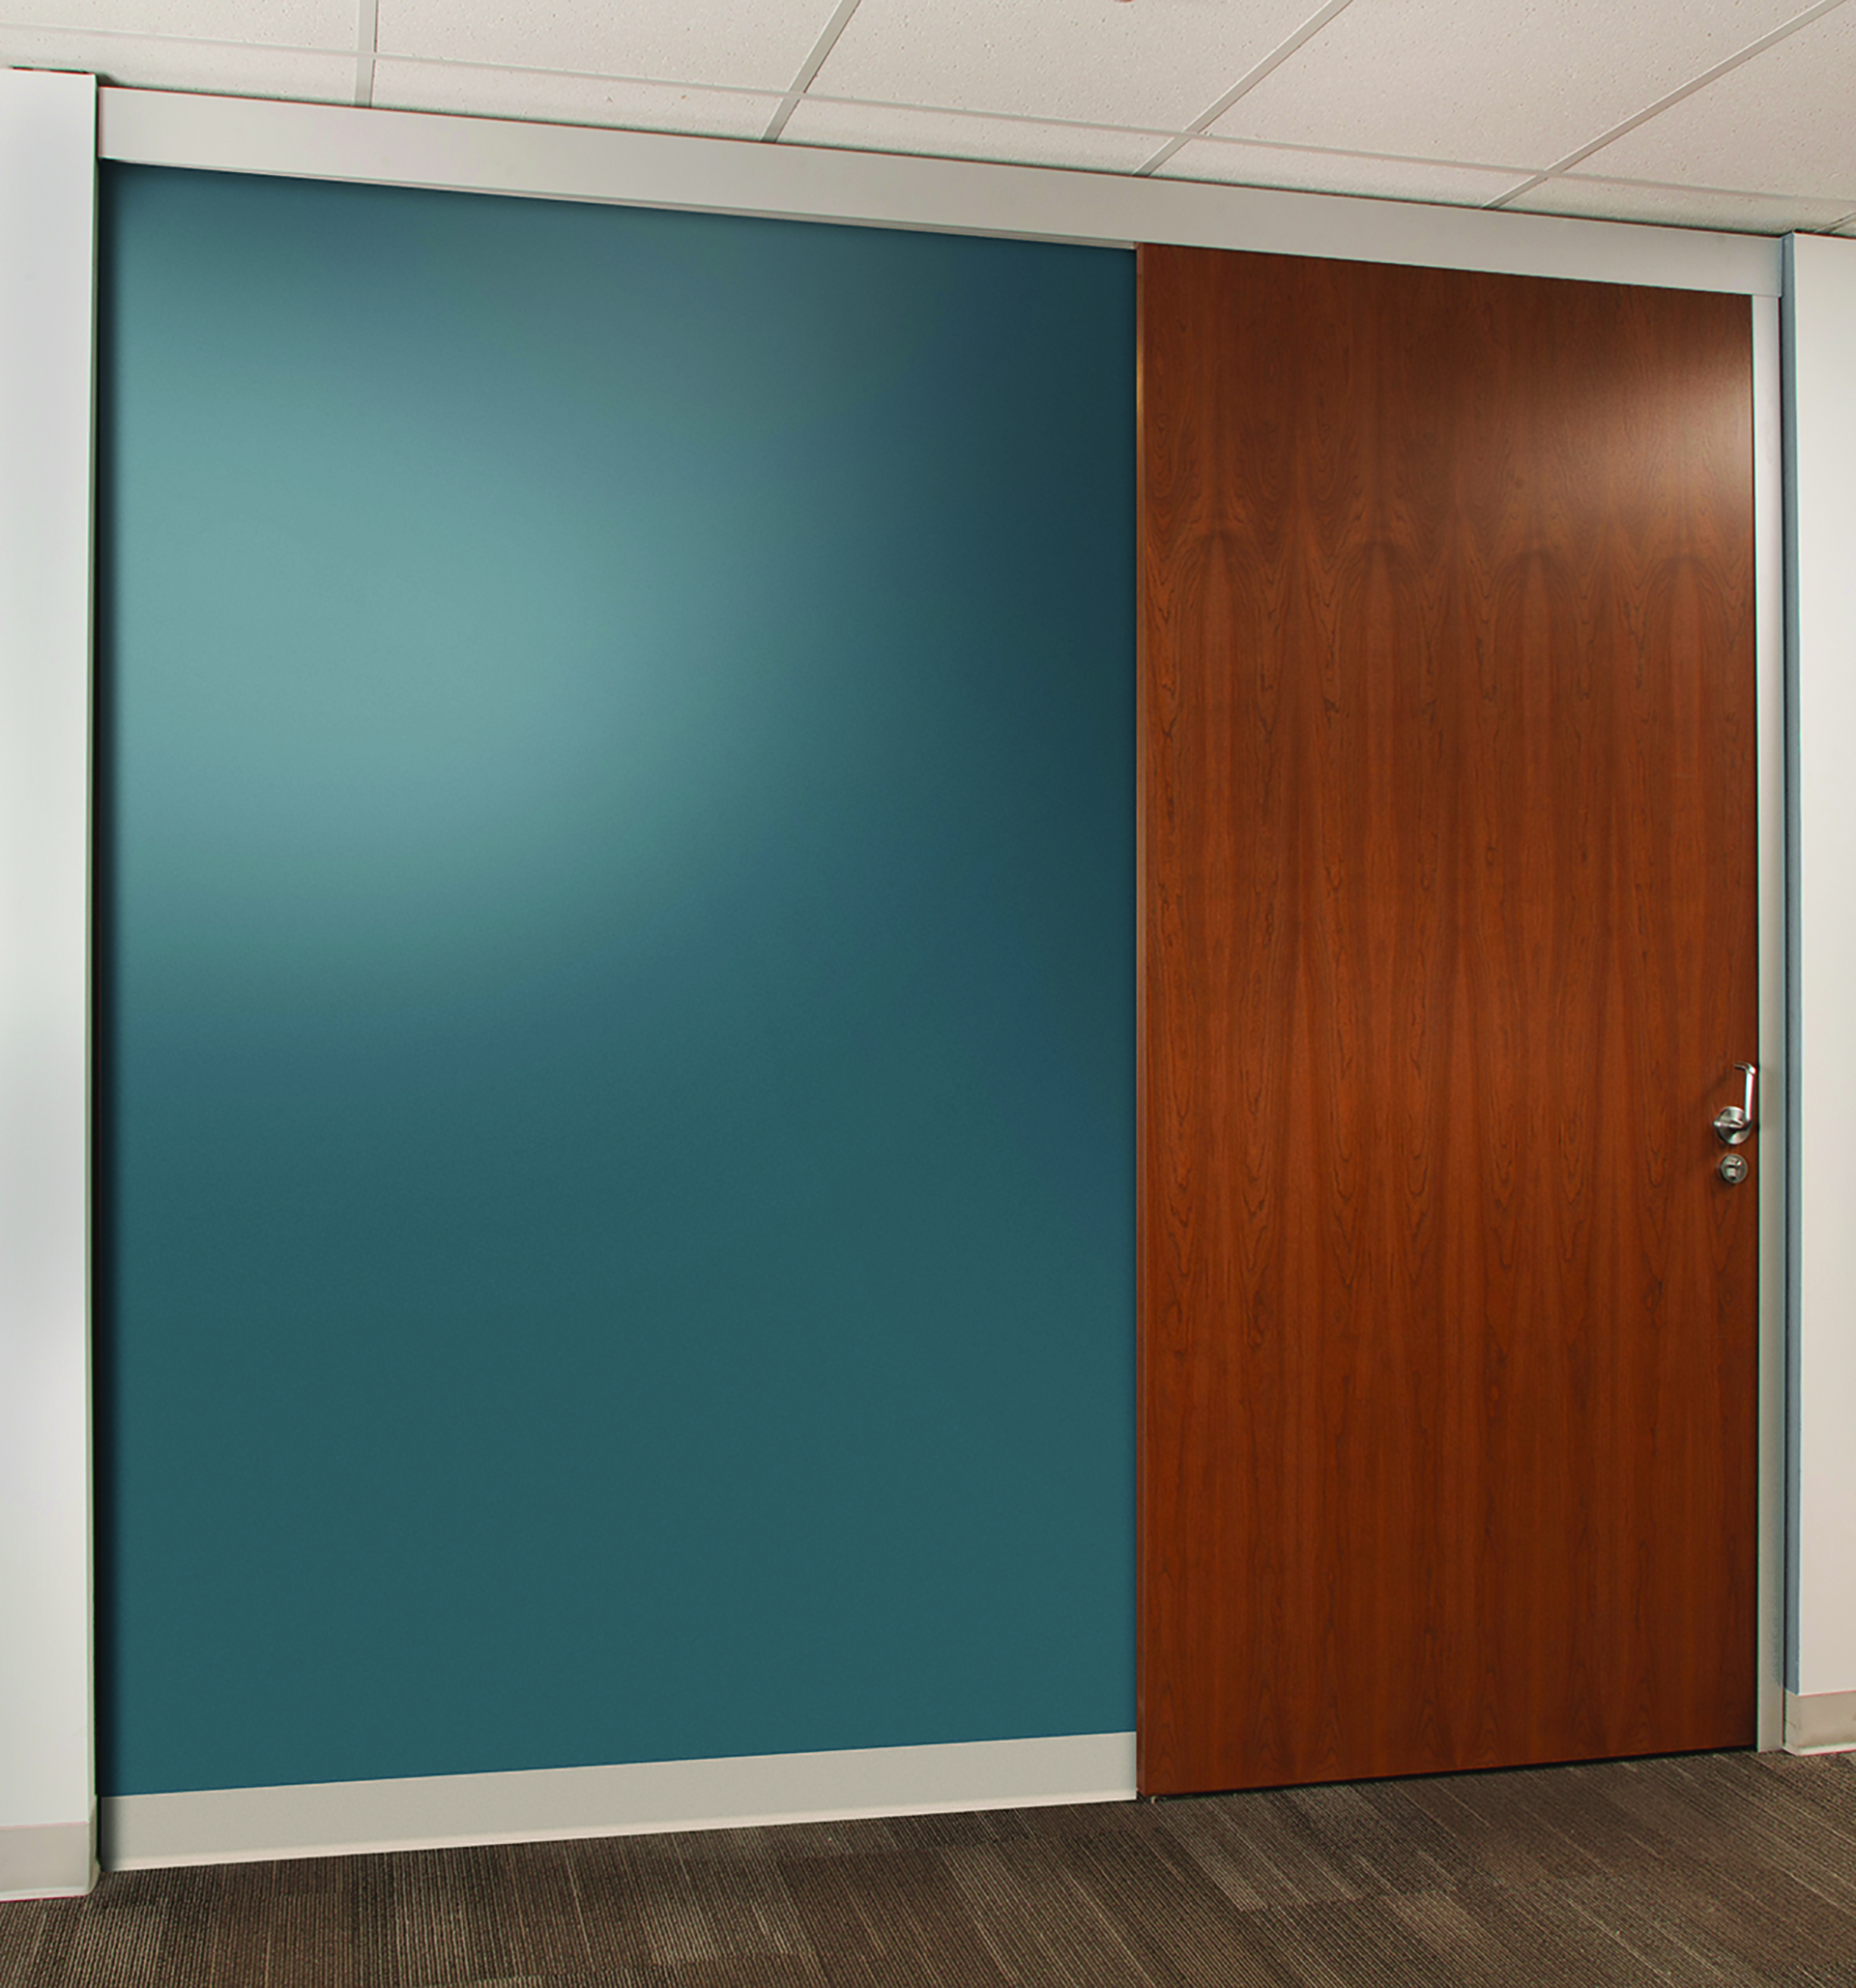 Ad Systems Introduces Industry First Fire Rated Wood Sliding Doors